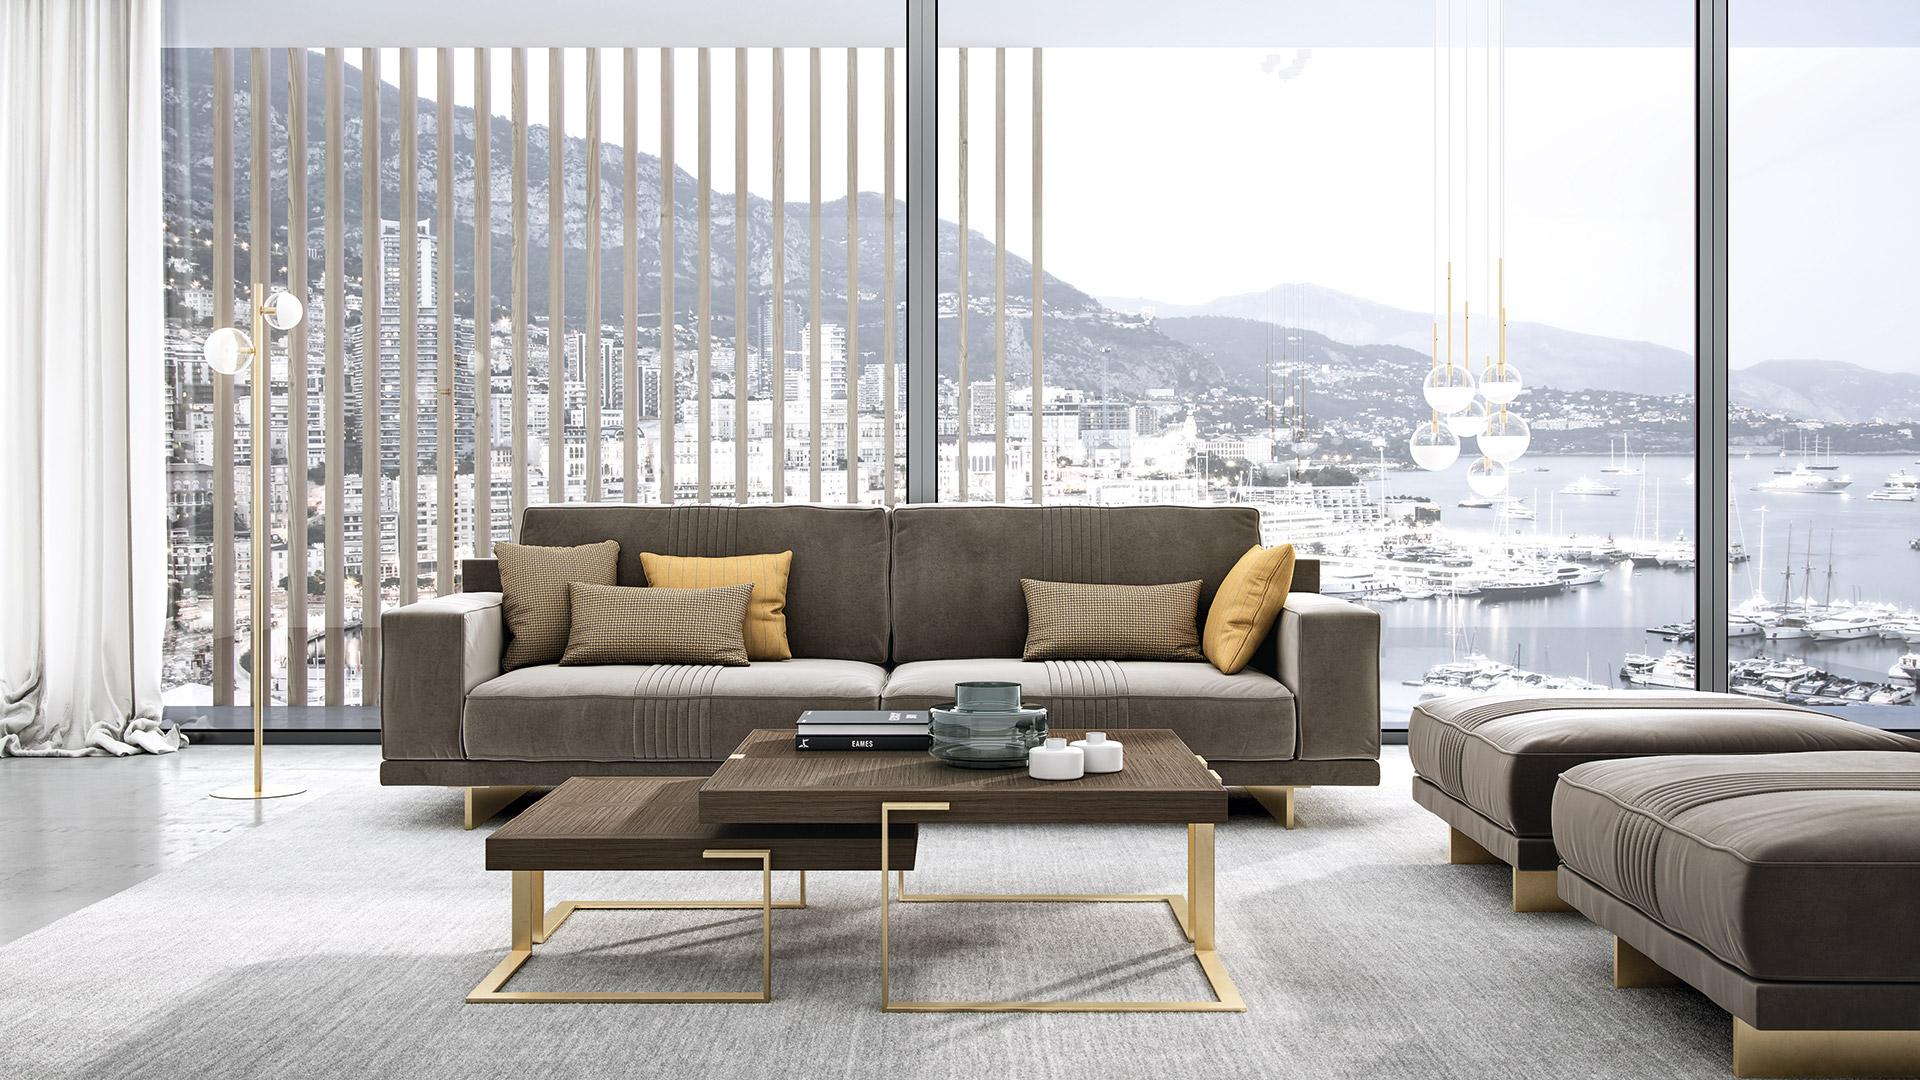 Three seater sofa characterized by a soft backrest perfectly shaped that enhances the comfort.
The metal base is in gold finishing and improves the modern look of the sofa.
On the back and on the seating complete the design thanks to pipeline